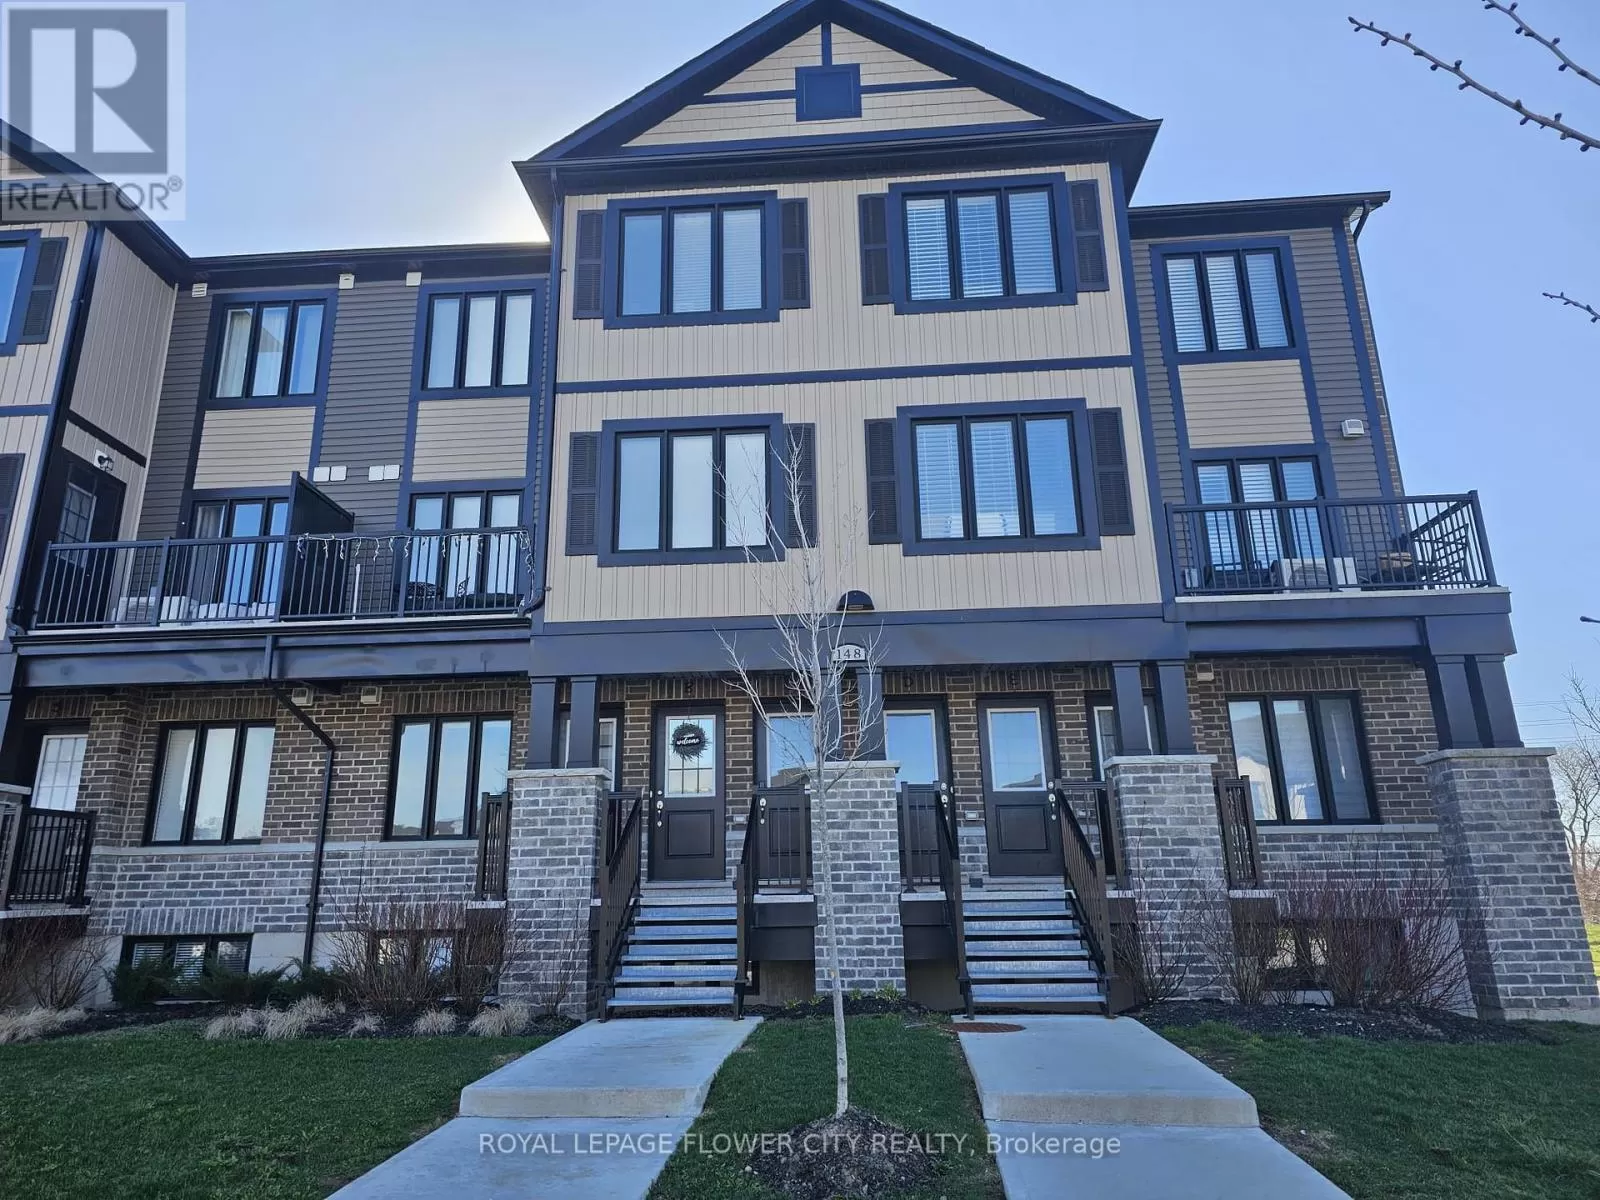 Row / Townhouse for rent: A - 148 Rochefort Street, Kitchener, Ontario N2R 0P5